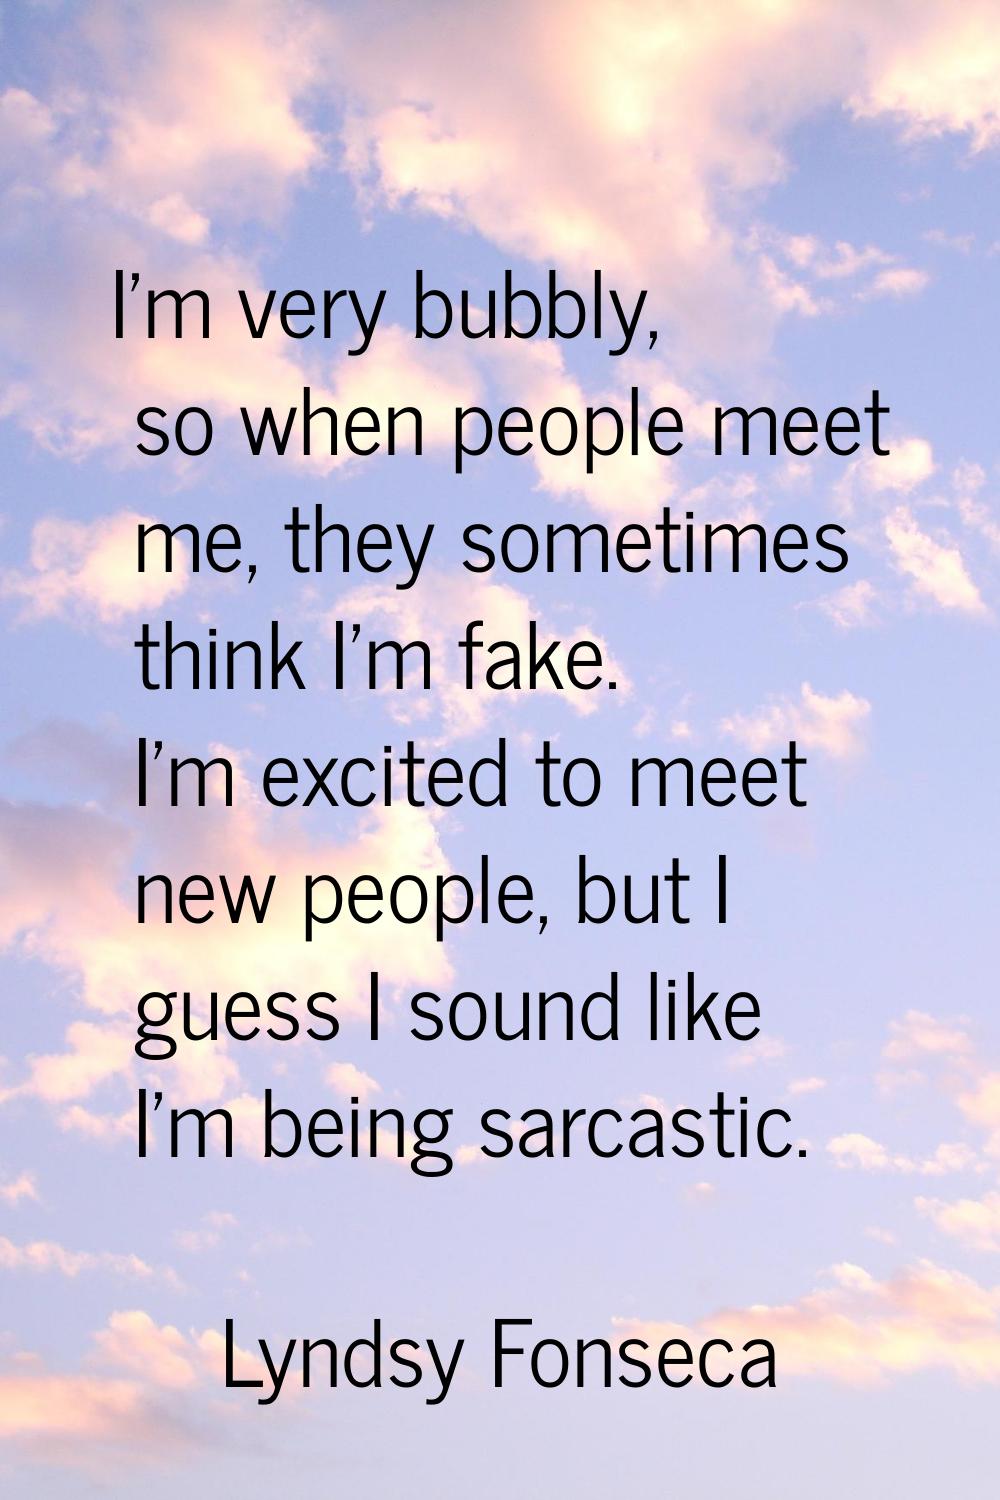 I'm very bubbly, so when people meet me, they sometimes think I'm fake. I'm excited to meet new peo